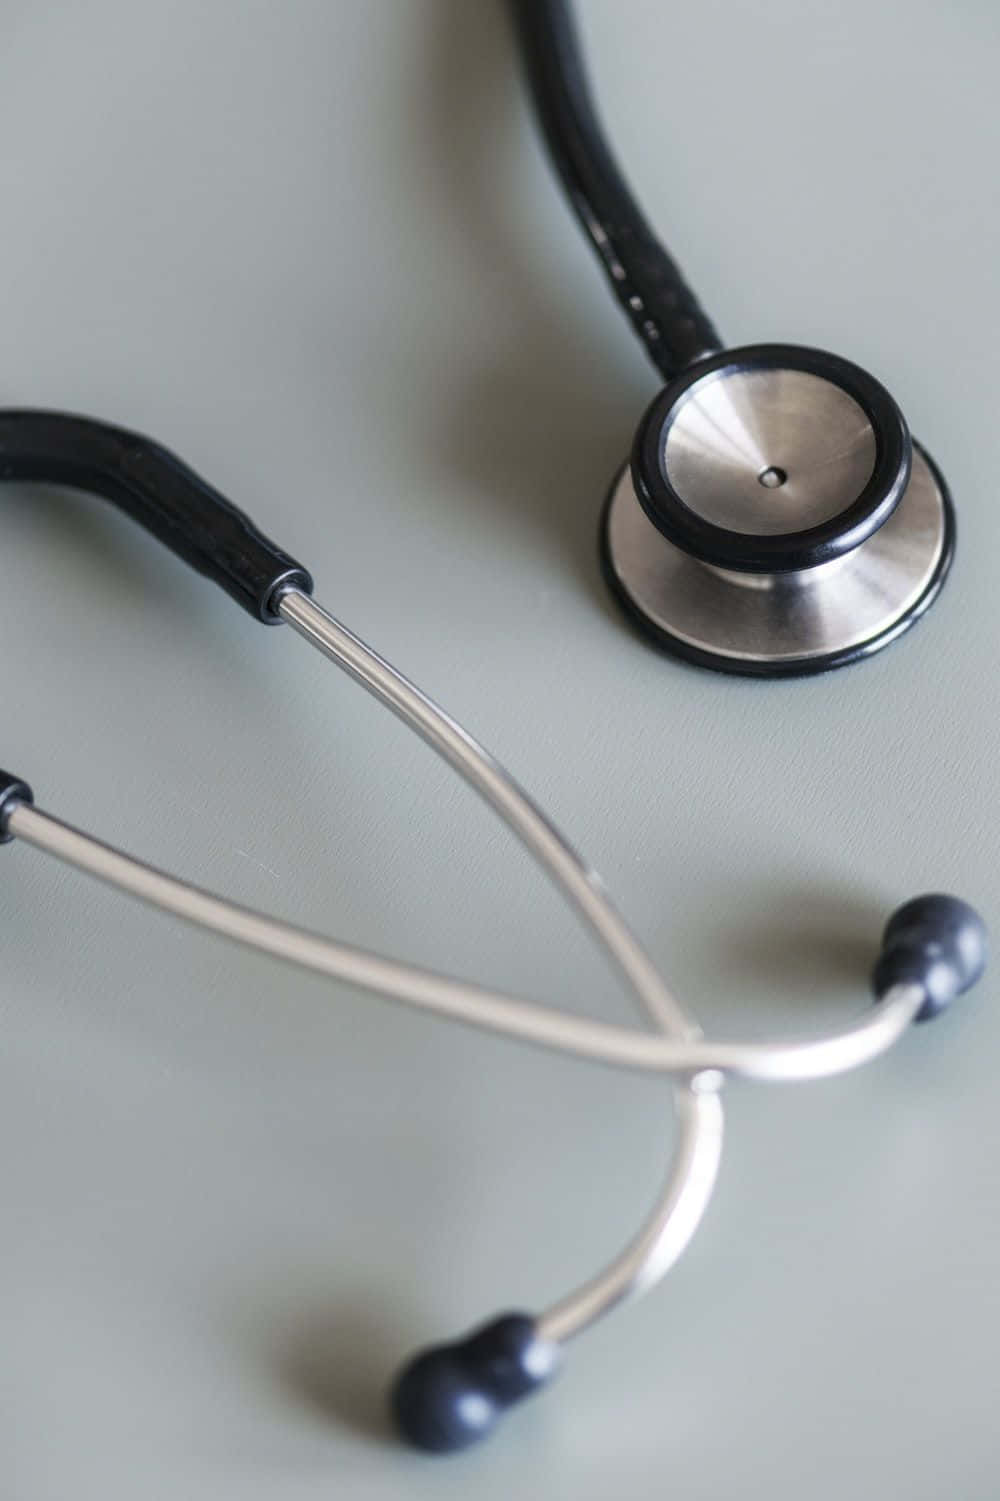 Stethoscope on a wooden table